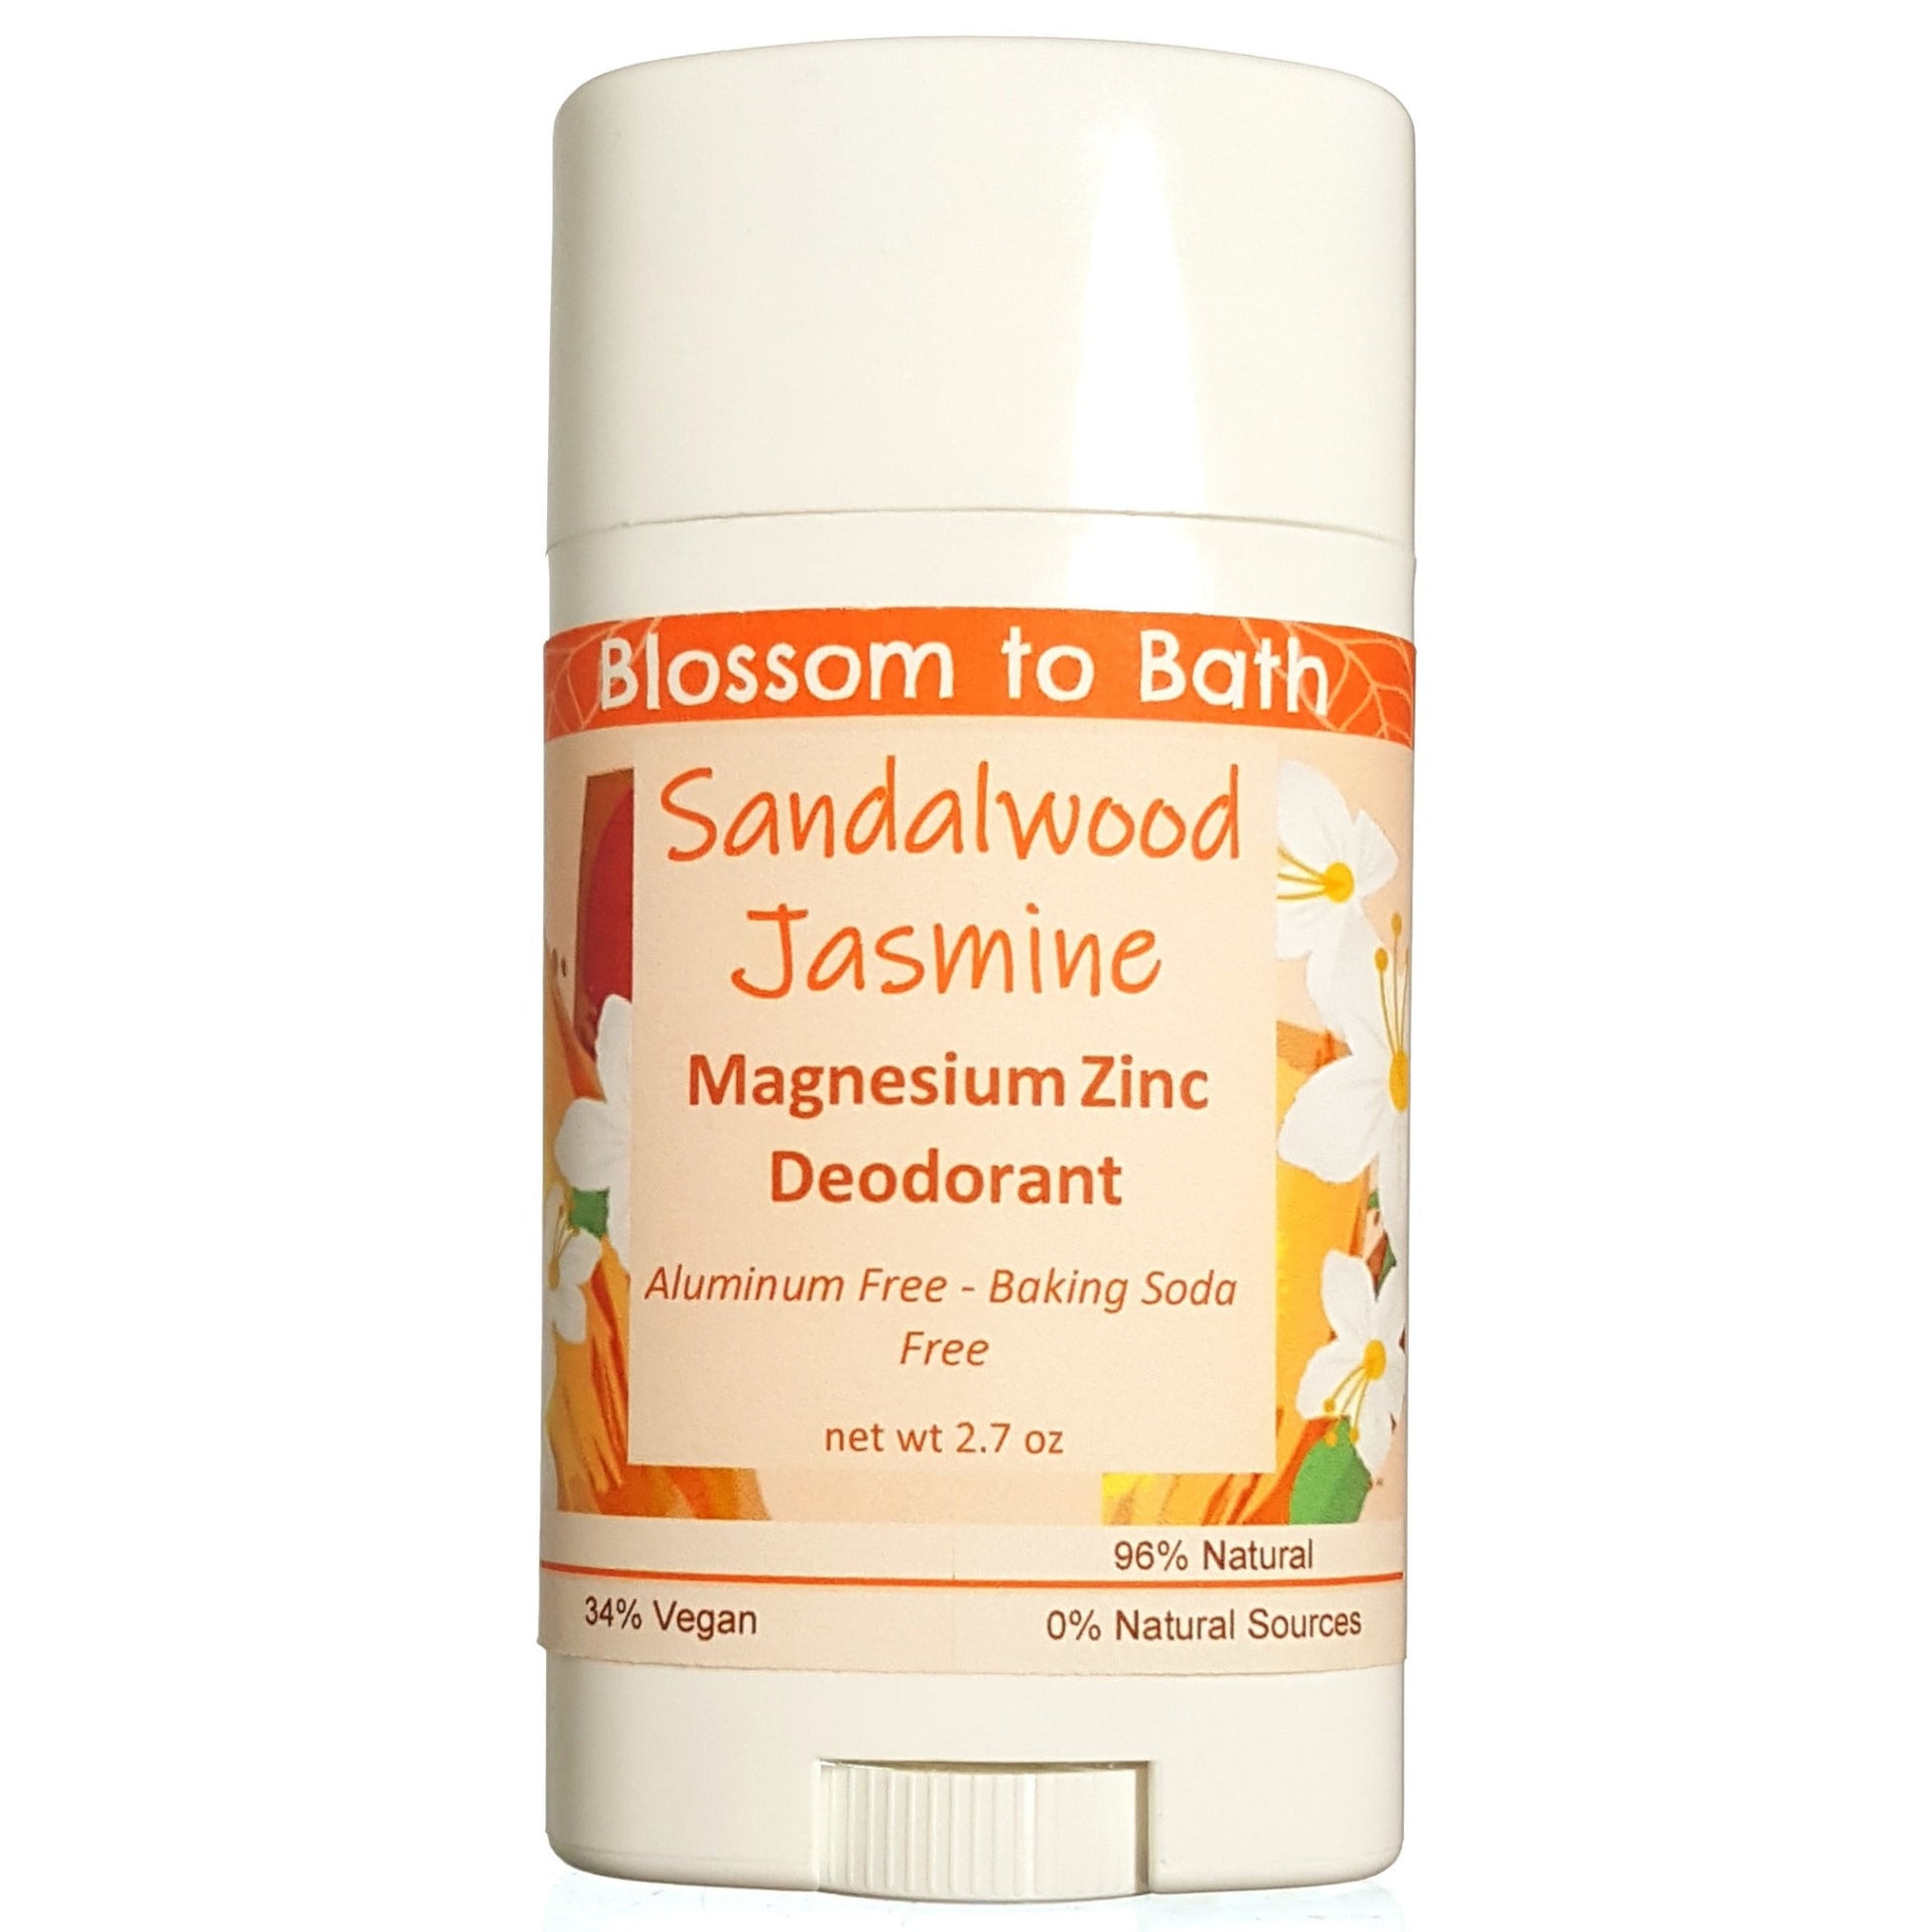 Buy Blossom to Bath Sandalwood Jasmine Magnesium Zinc Deodorant from Flowersong Soap Studio.  Long lasting protection made from organic botanicals and butters, made without baking soda, tested in the Arizona heat  Floral jasmine meets earthy sandalwood to create a soul stirring blend.